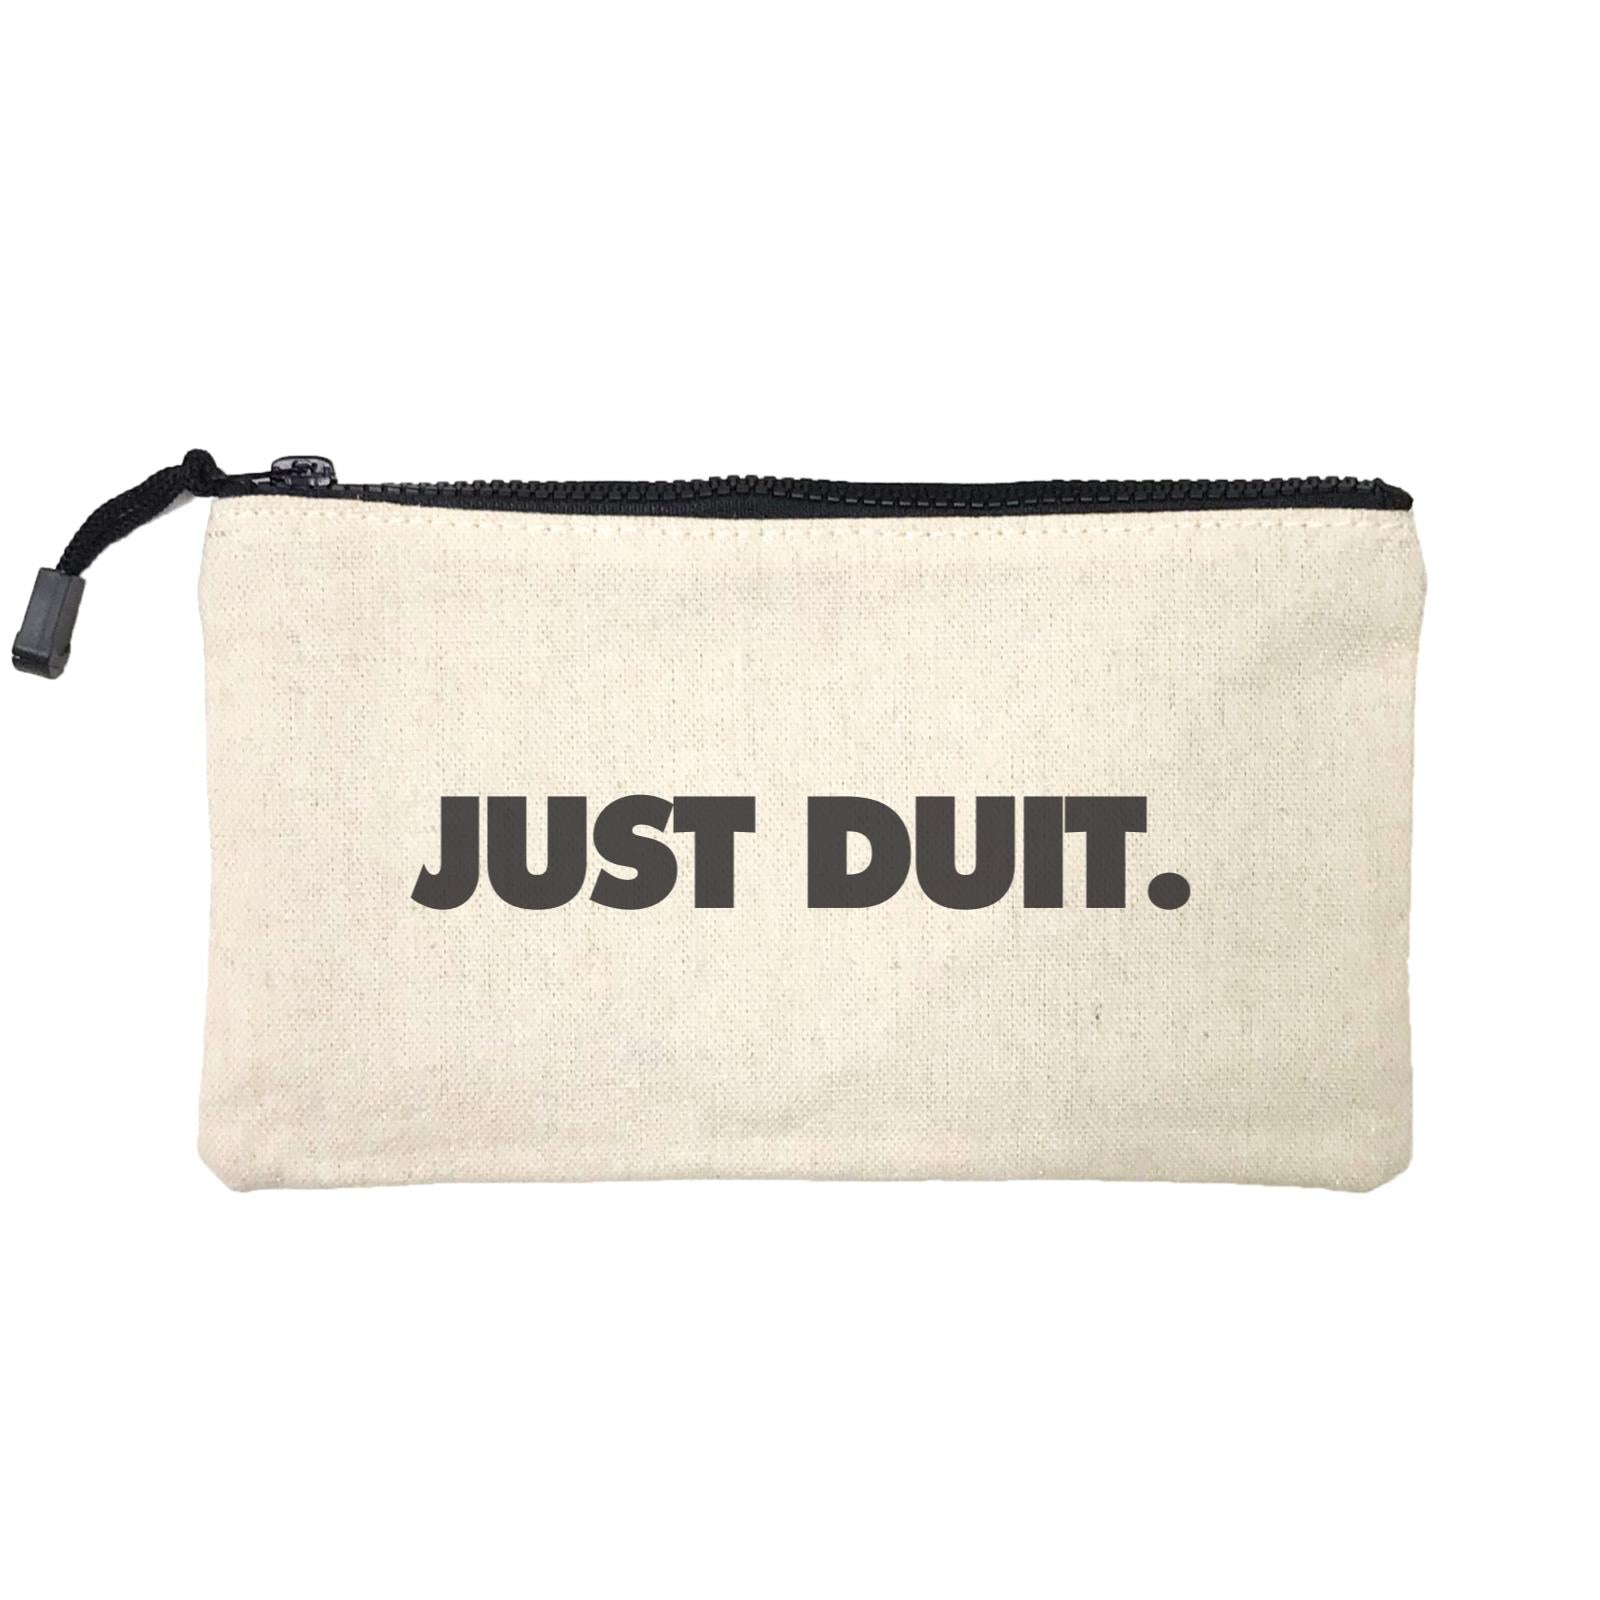 Slang Statement Just Duit SP Stationery Pouch